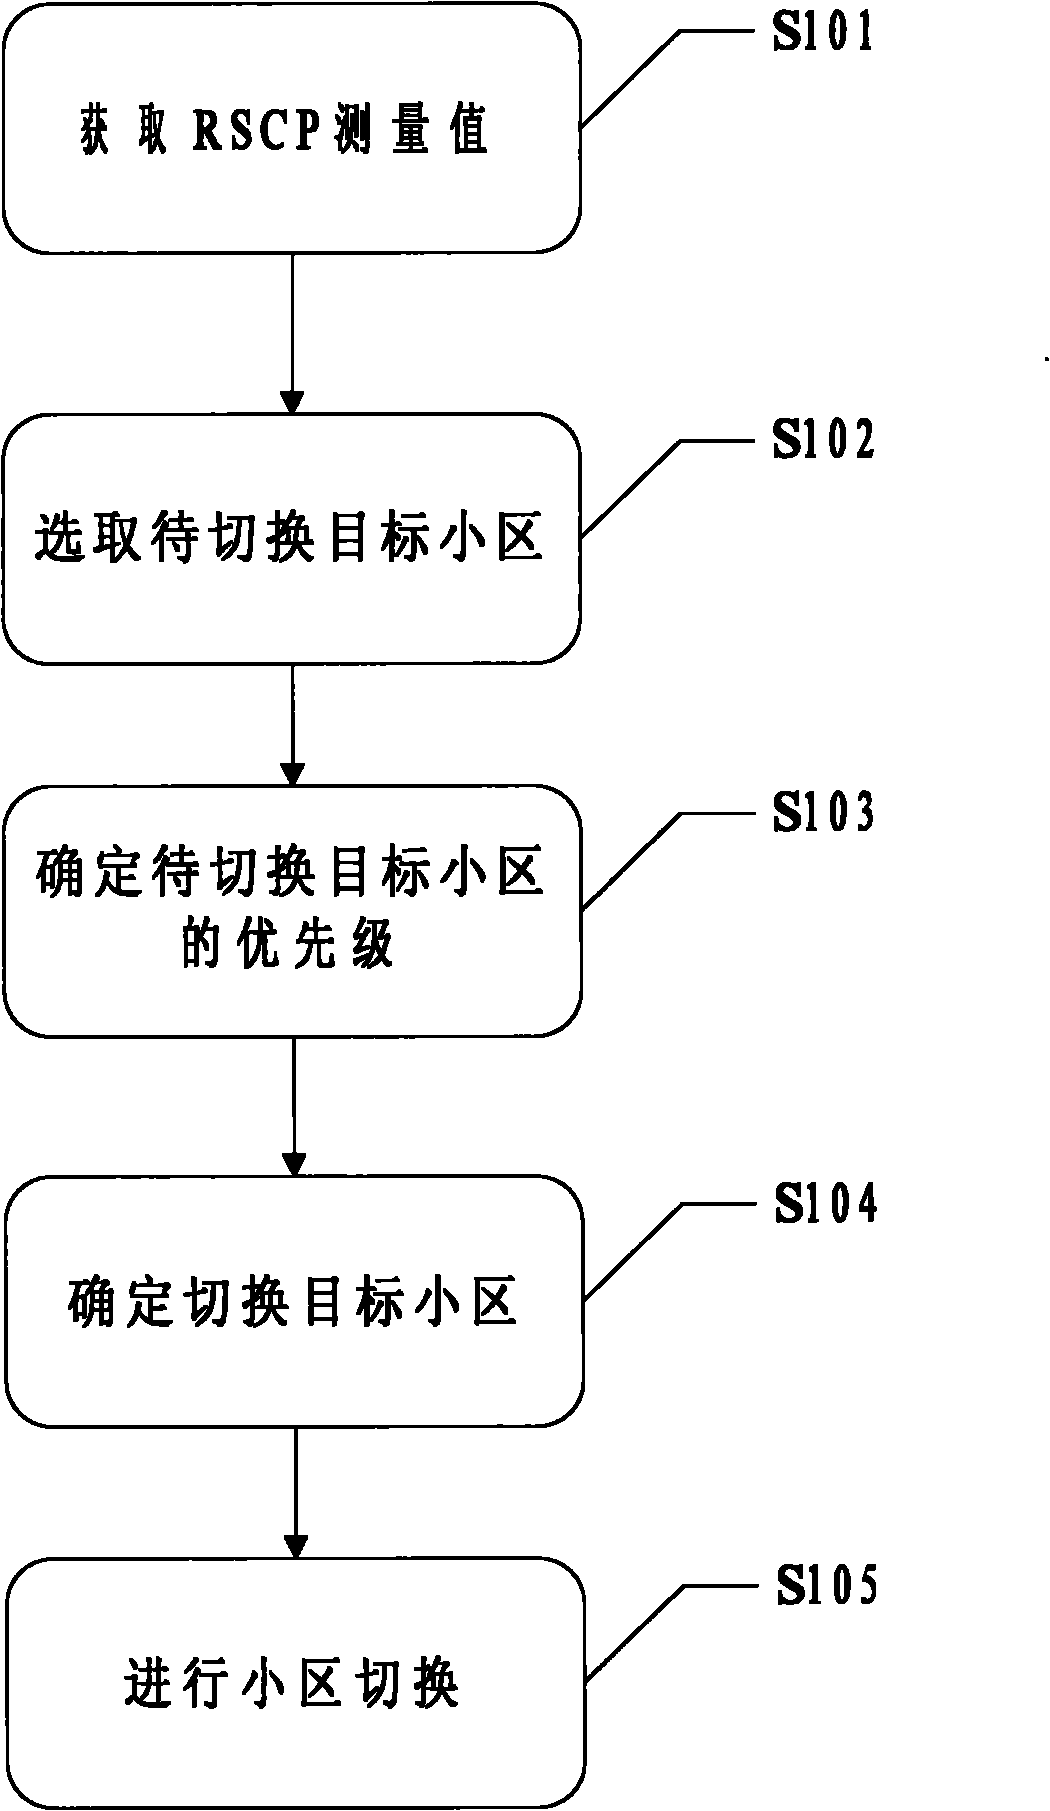 Method for cell handover in TD-SCDMA (Time Division-Synchronous Code Division Multiple Access) system and device for cell handover in TD-SCDMA system